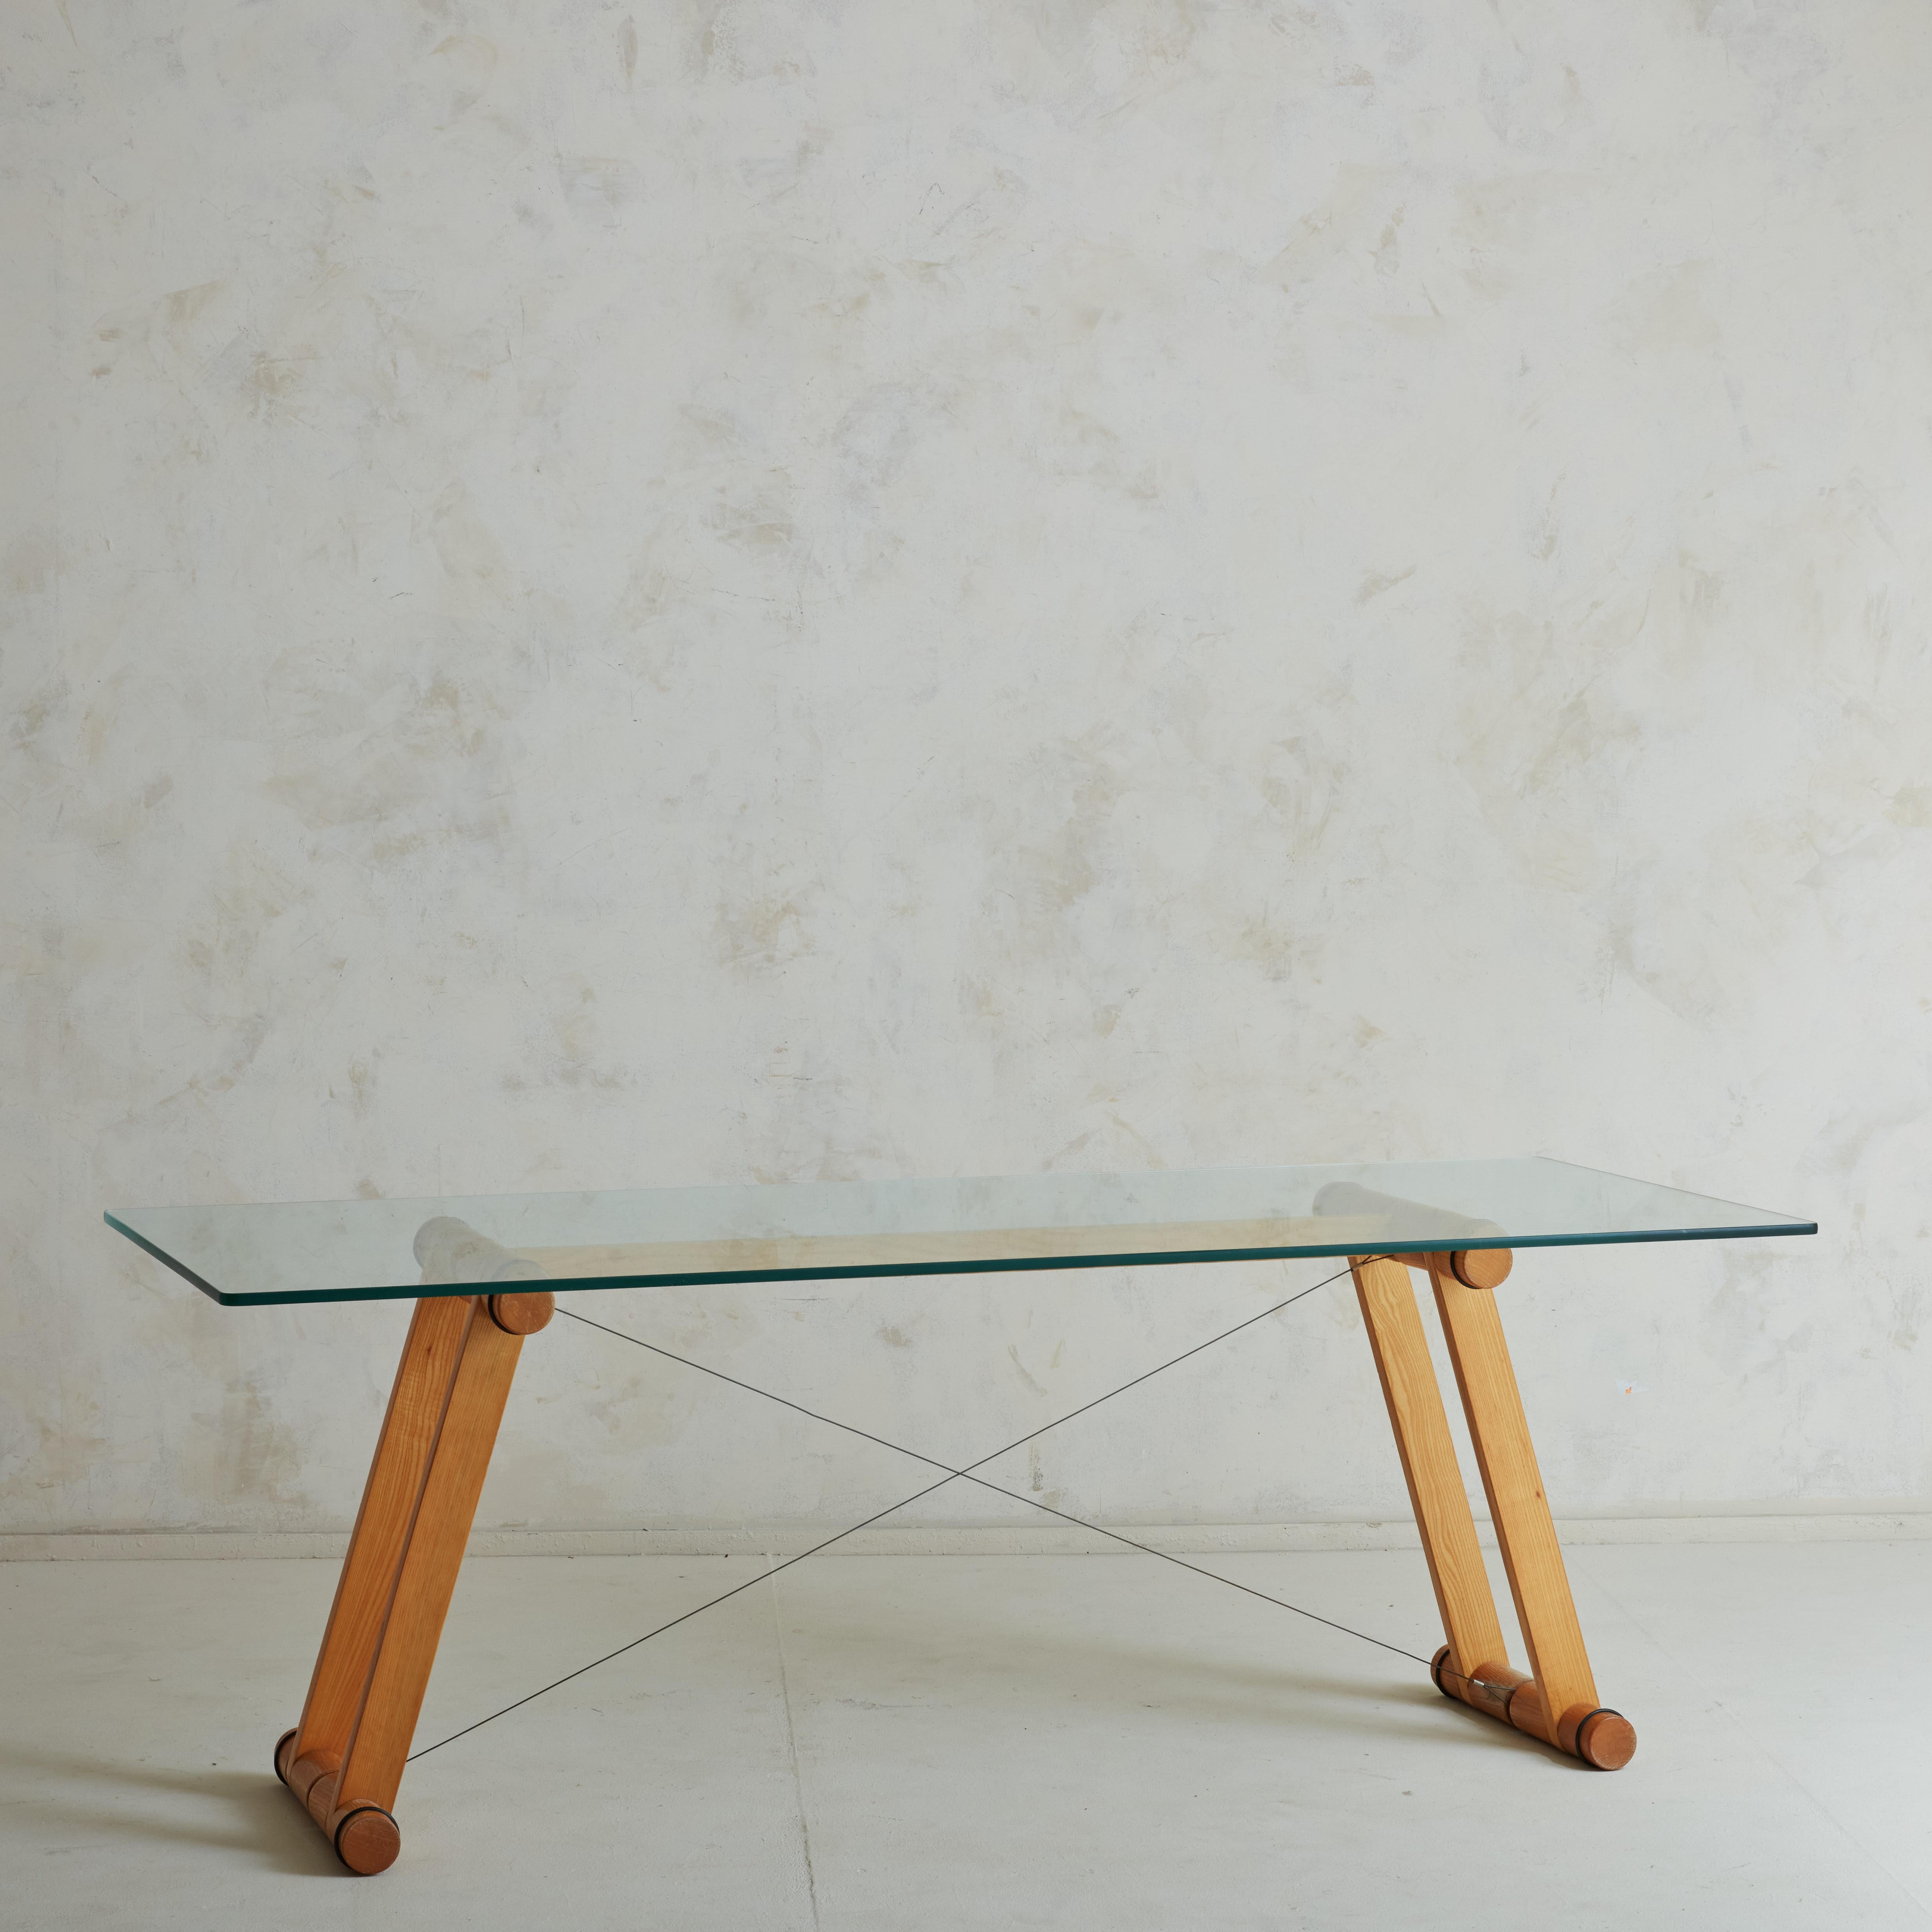 An exceptional 1970s ‘Teso’ table designed by Italian architecture and design group Superstudio  for Giovanetti. This table has a trestle base in beautifully grained ash wood with a crossed steel-wire. The base supports a .5” thick rectangular